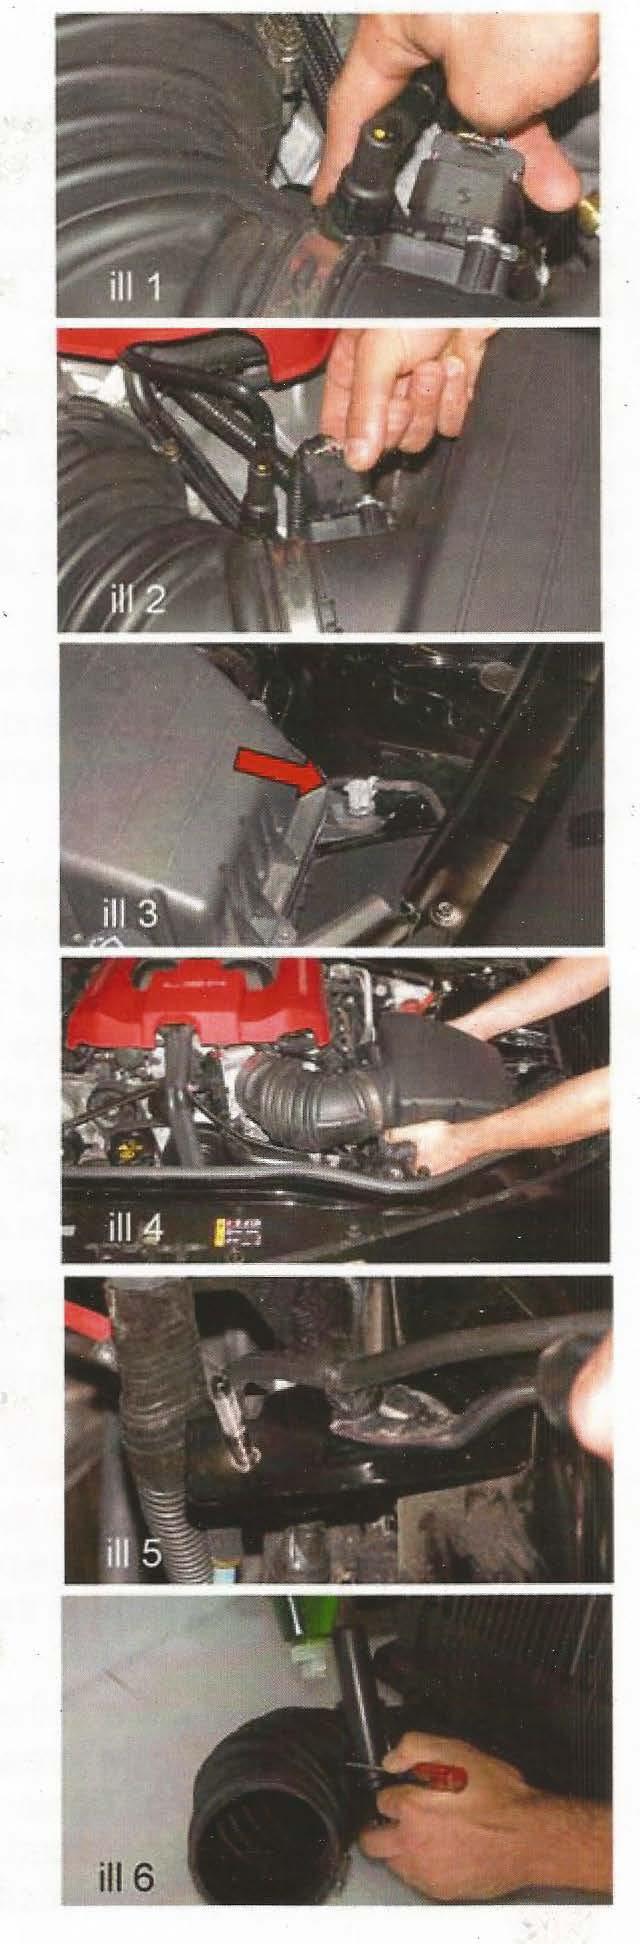 Remove stock air intake 1) Disconnect the small breather fitting-pull up slightly on the small release lever, then push it clockwise appr. 1/4" Pull straight upwards to remove the fitting. (ill.